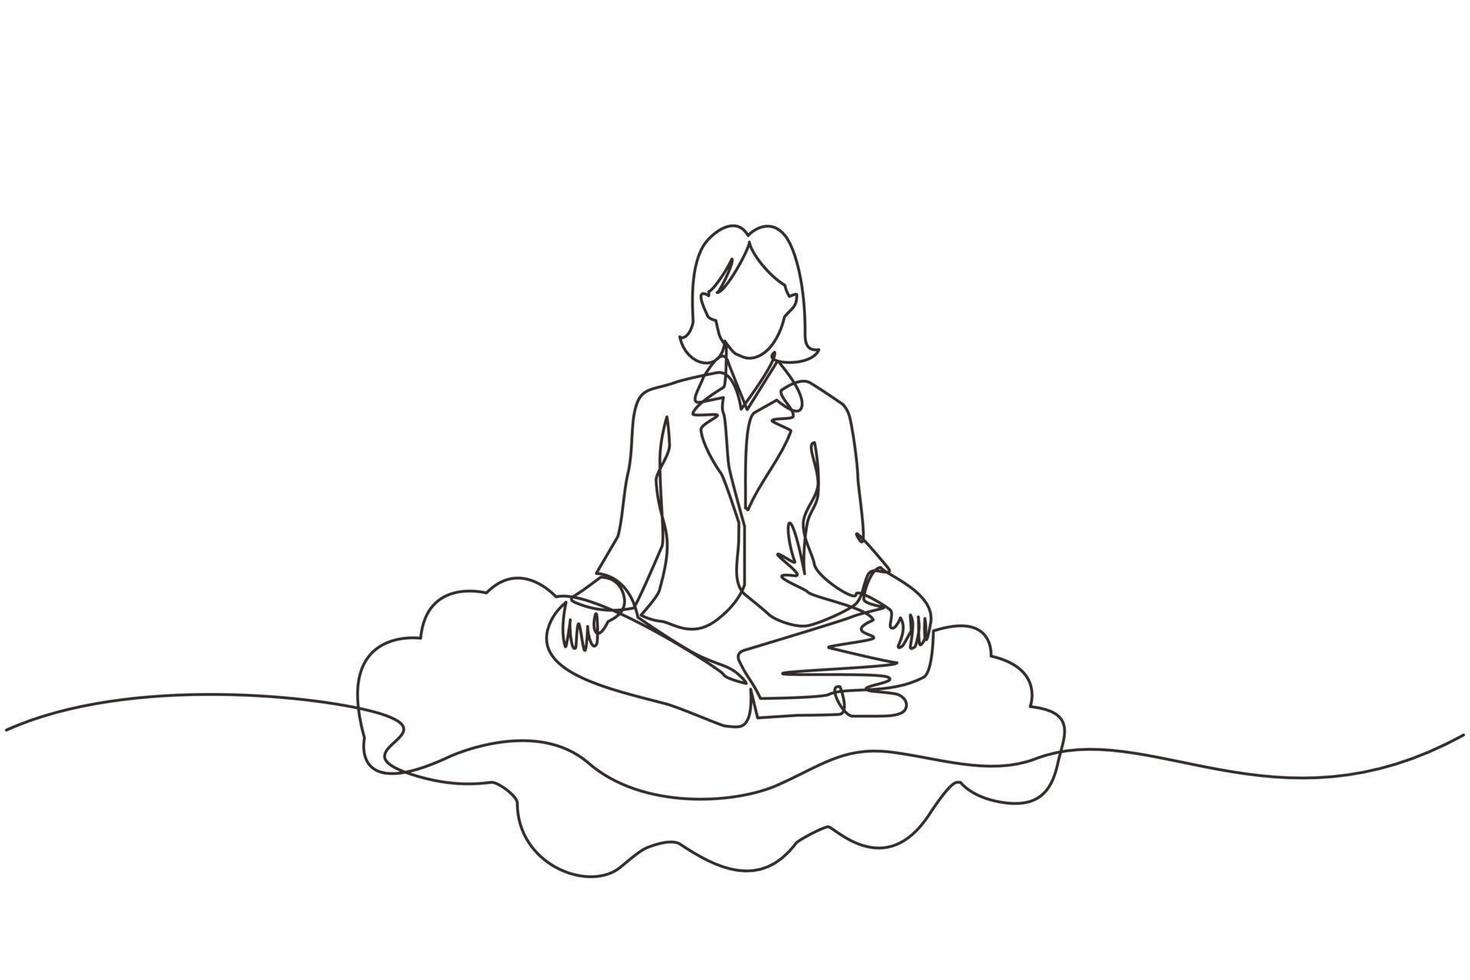 Continuous one line drawing office worker or businesswoman relaxes, meditates in lotus position on clouds. Cheerful woman relaxing with yoga or meditation pose. Single line draw design vector graphic